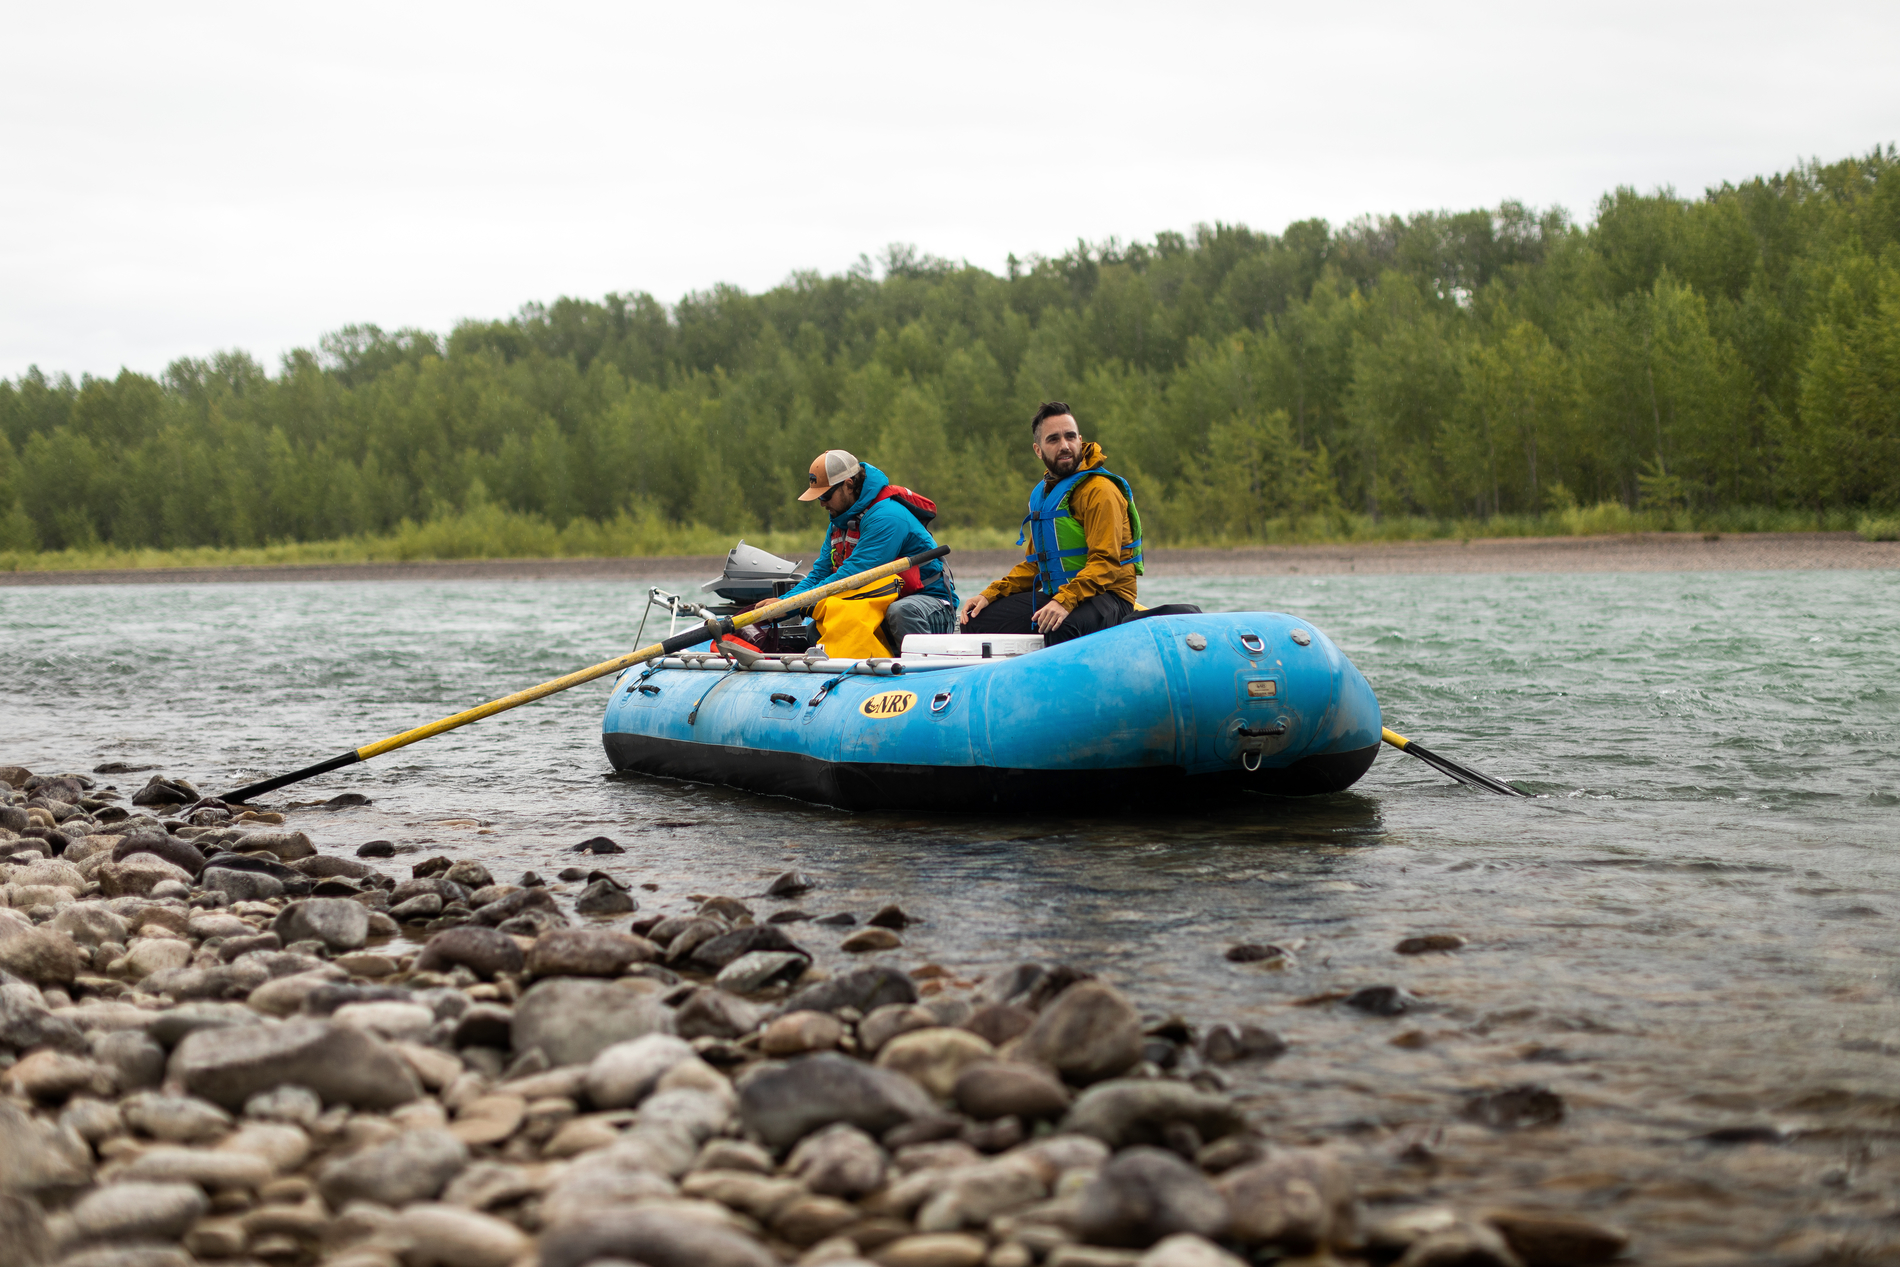 Two men sit in a blue raft on the Bulkley River. They are close to the rocky shore in the foreground. Green trees line the river bank on the opposite side.